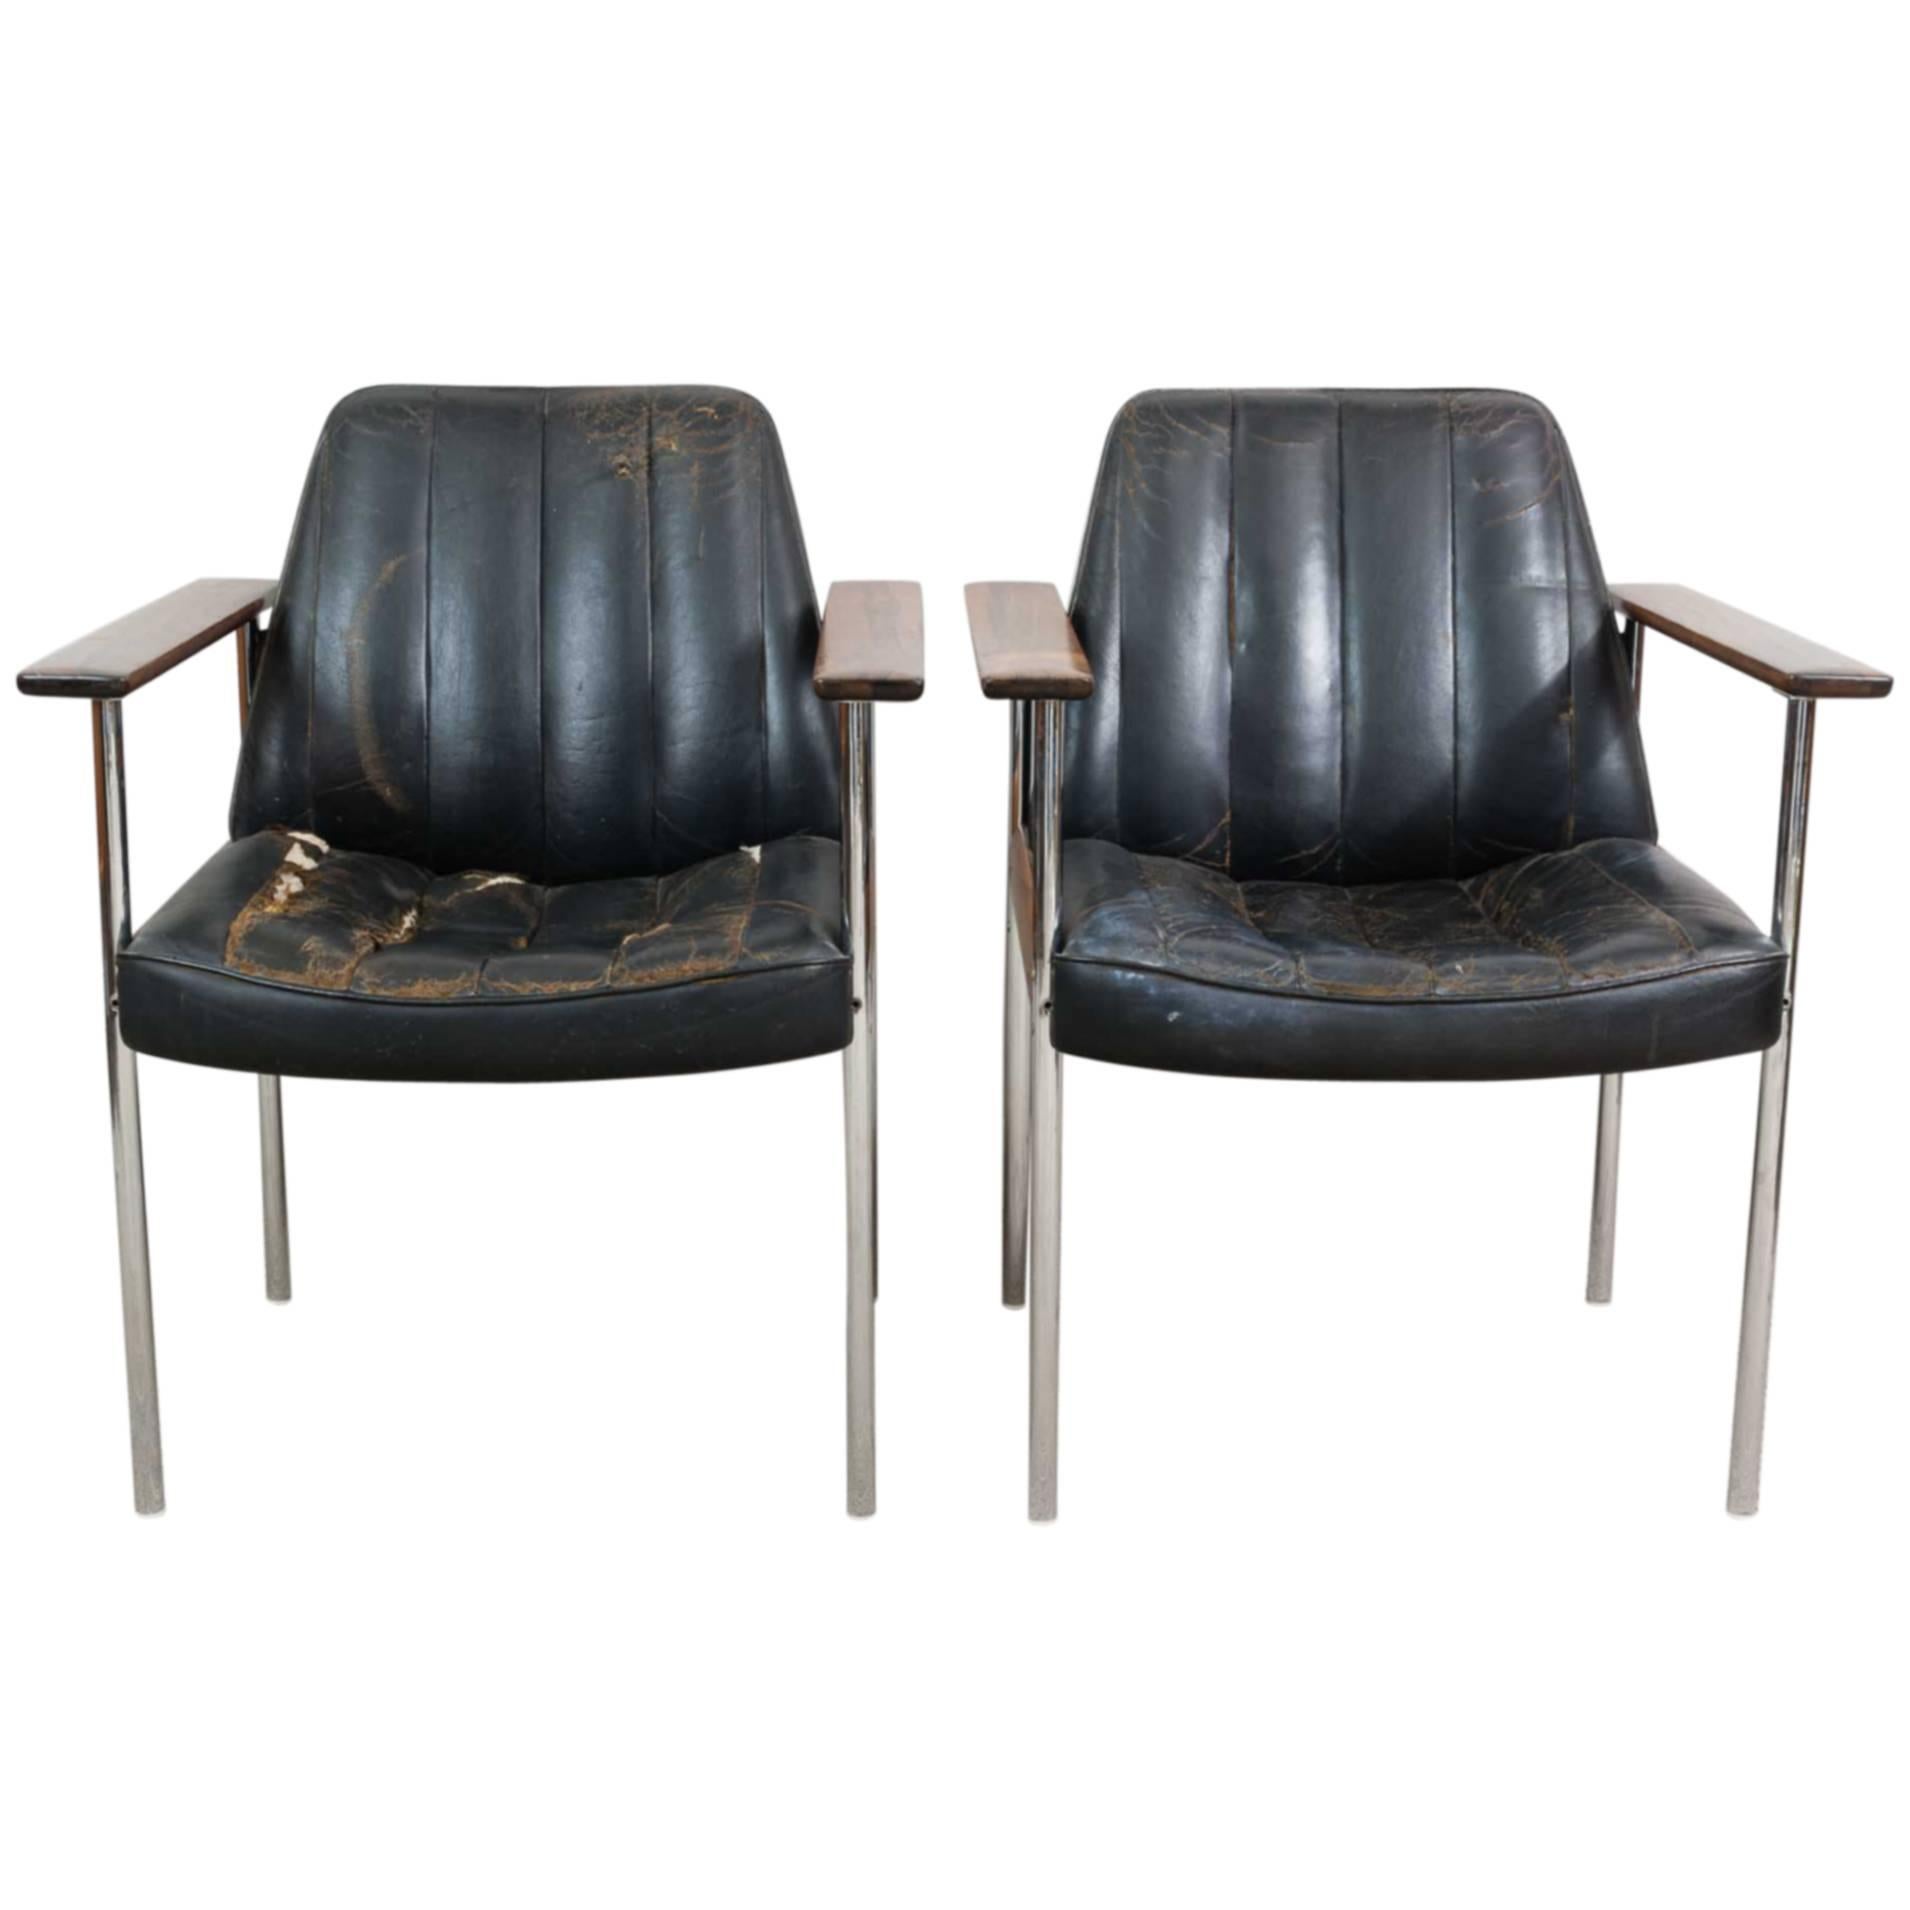 Pair of 1960s Rosewood Leather Chrome Armchairs by Sven Ivar Dysthe for Dokka